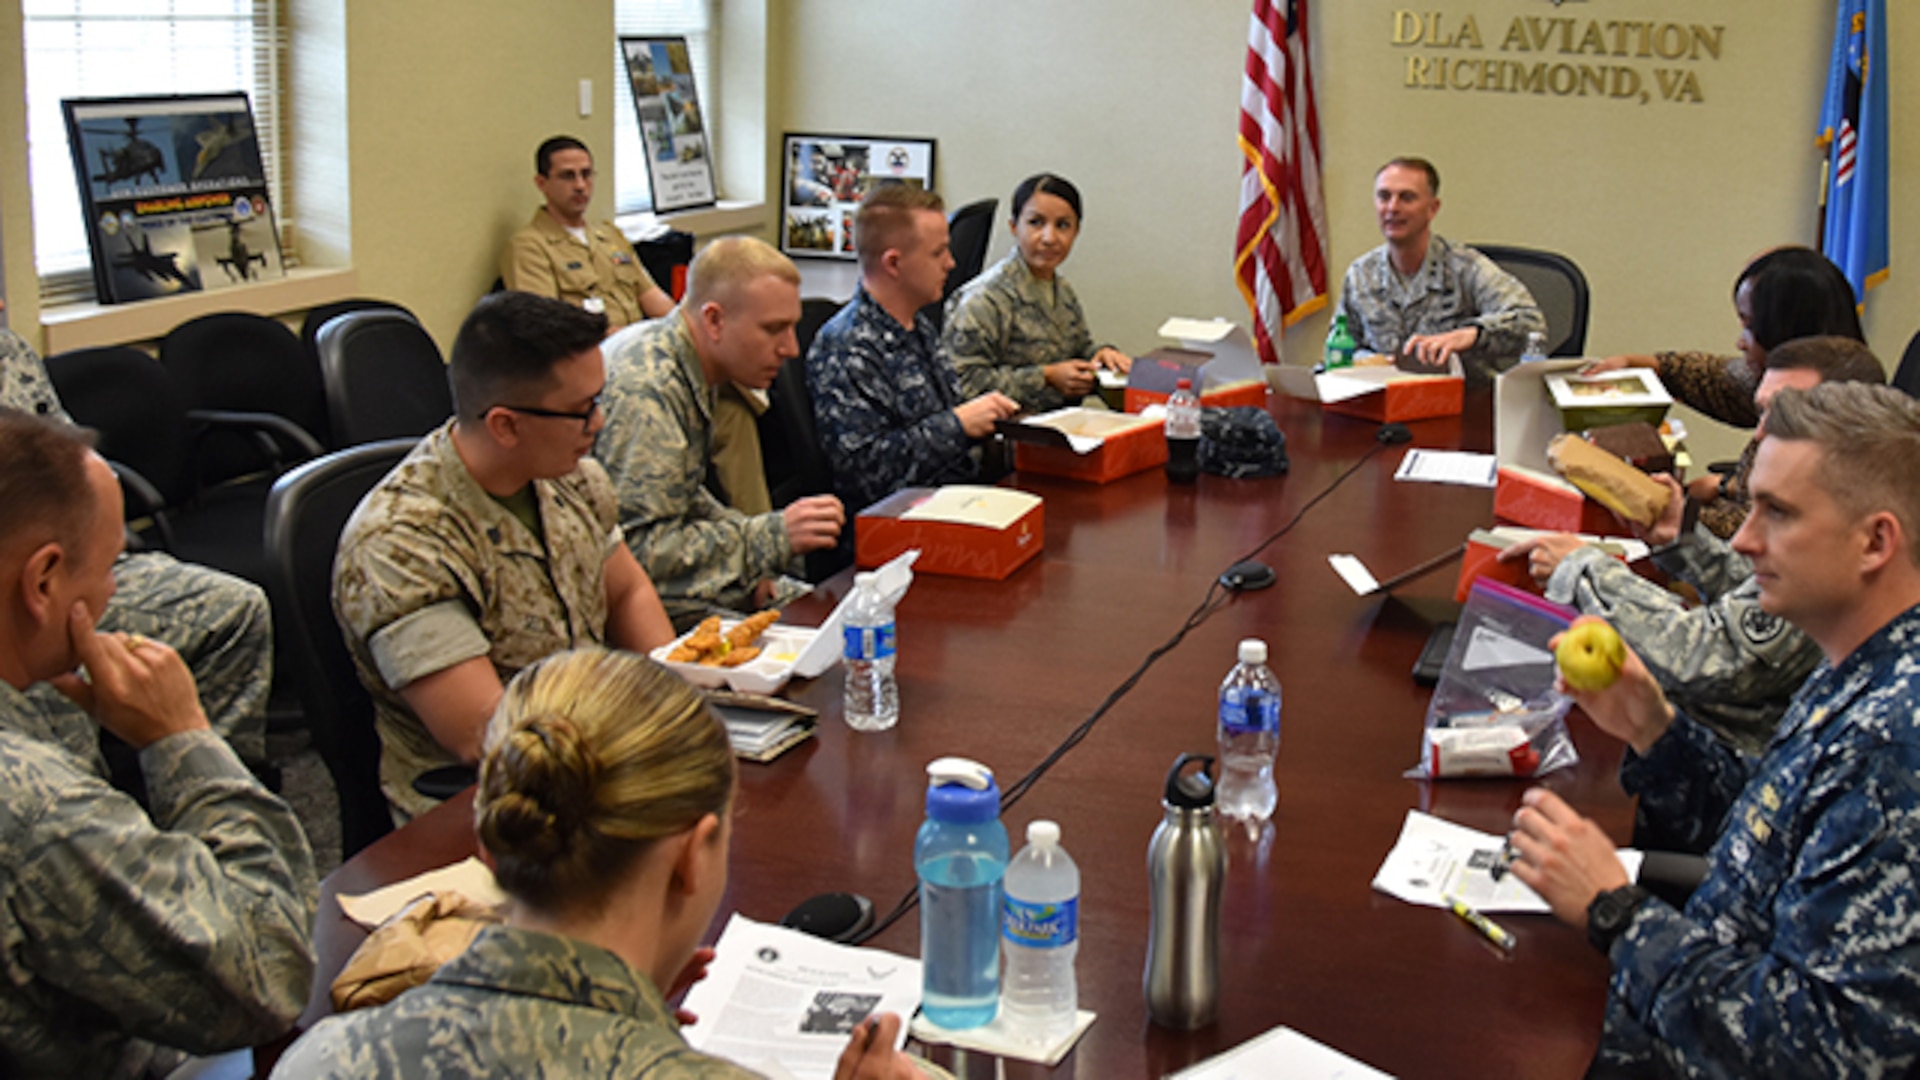 Air Force Maj. Gen. Warren Berry, vice commander, Air Force Materiel Command, Wright-Patterson Air Force Base, Ohio, shares lunch with Defense Logistics Agency Aviation's military cadre during his visit to Defense Supply Center Richmond, Virginia, May 4, 2016.